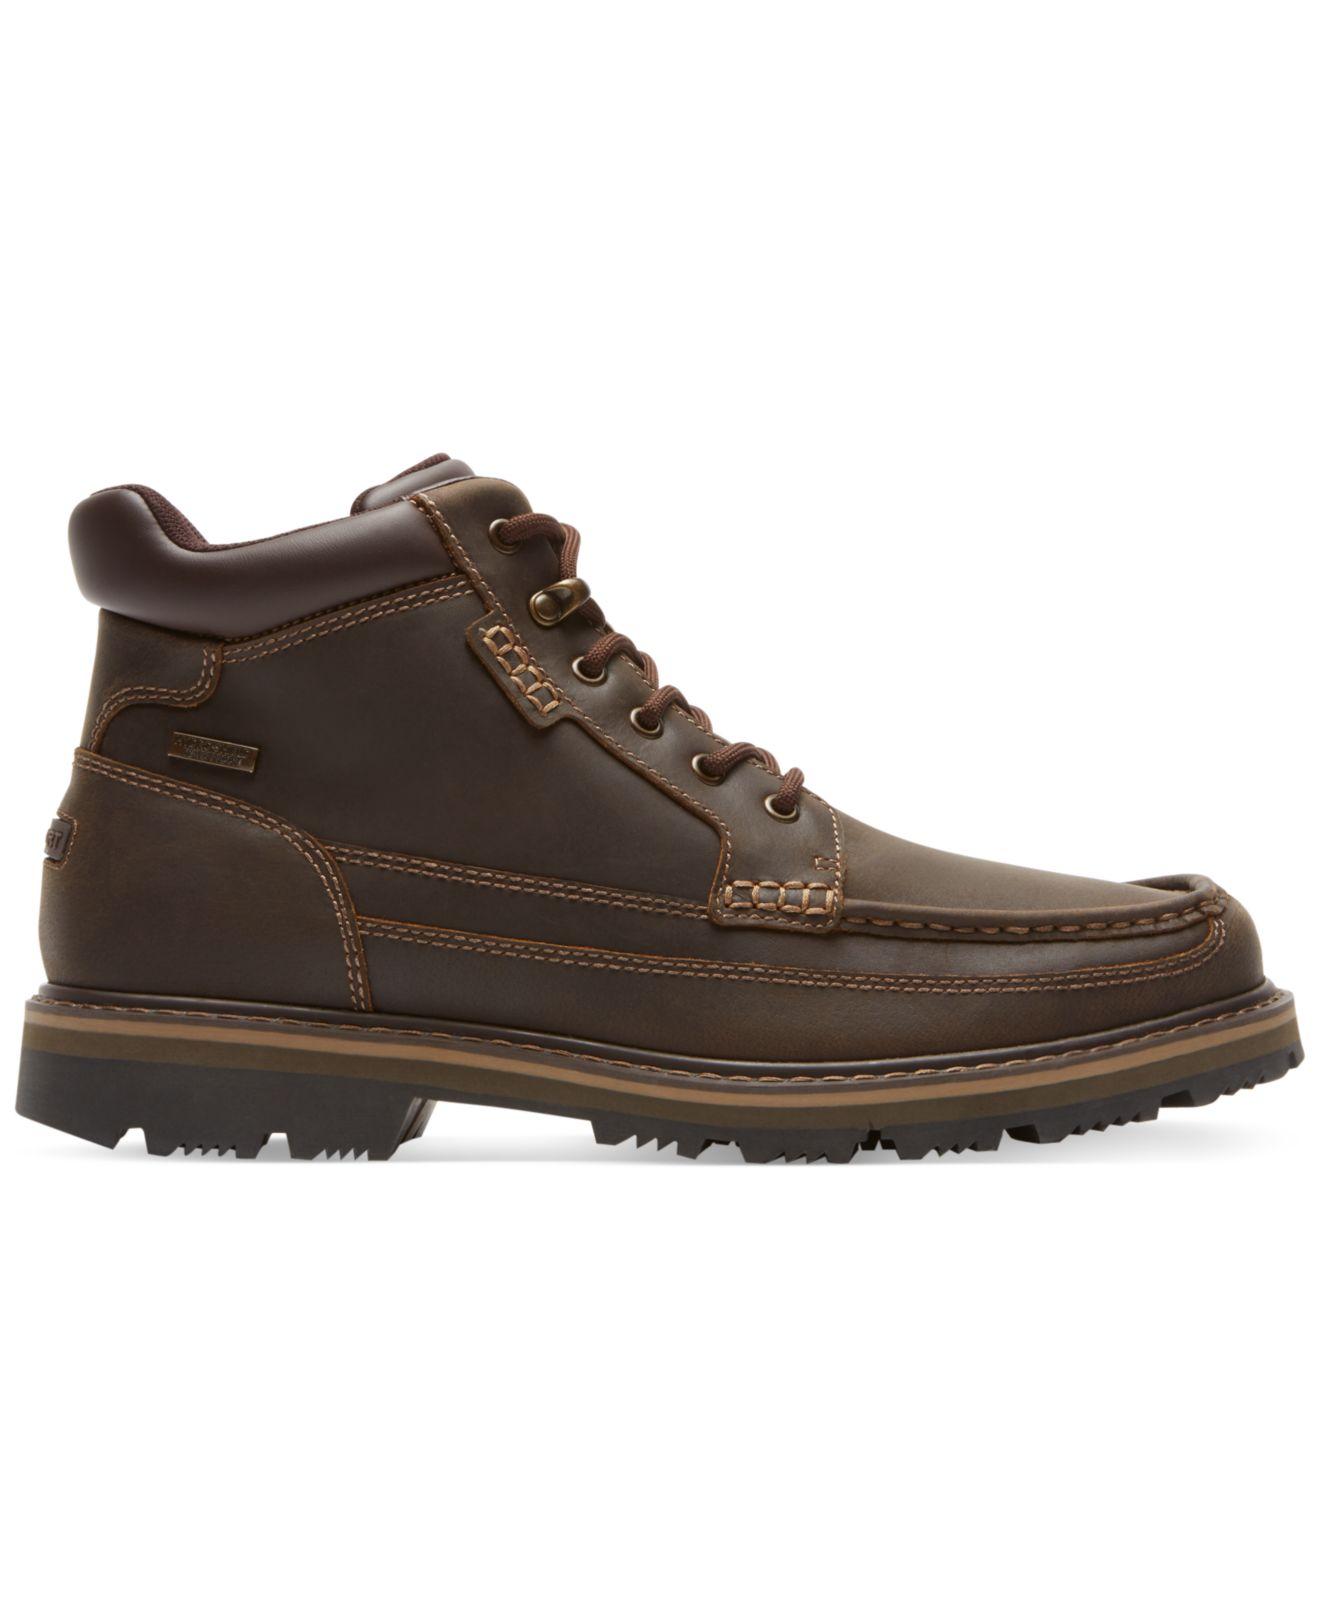 Rockport Leather Gentleman's Waterproof Moc Toe Mid Boots in Brown for ...